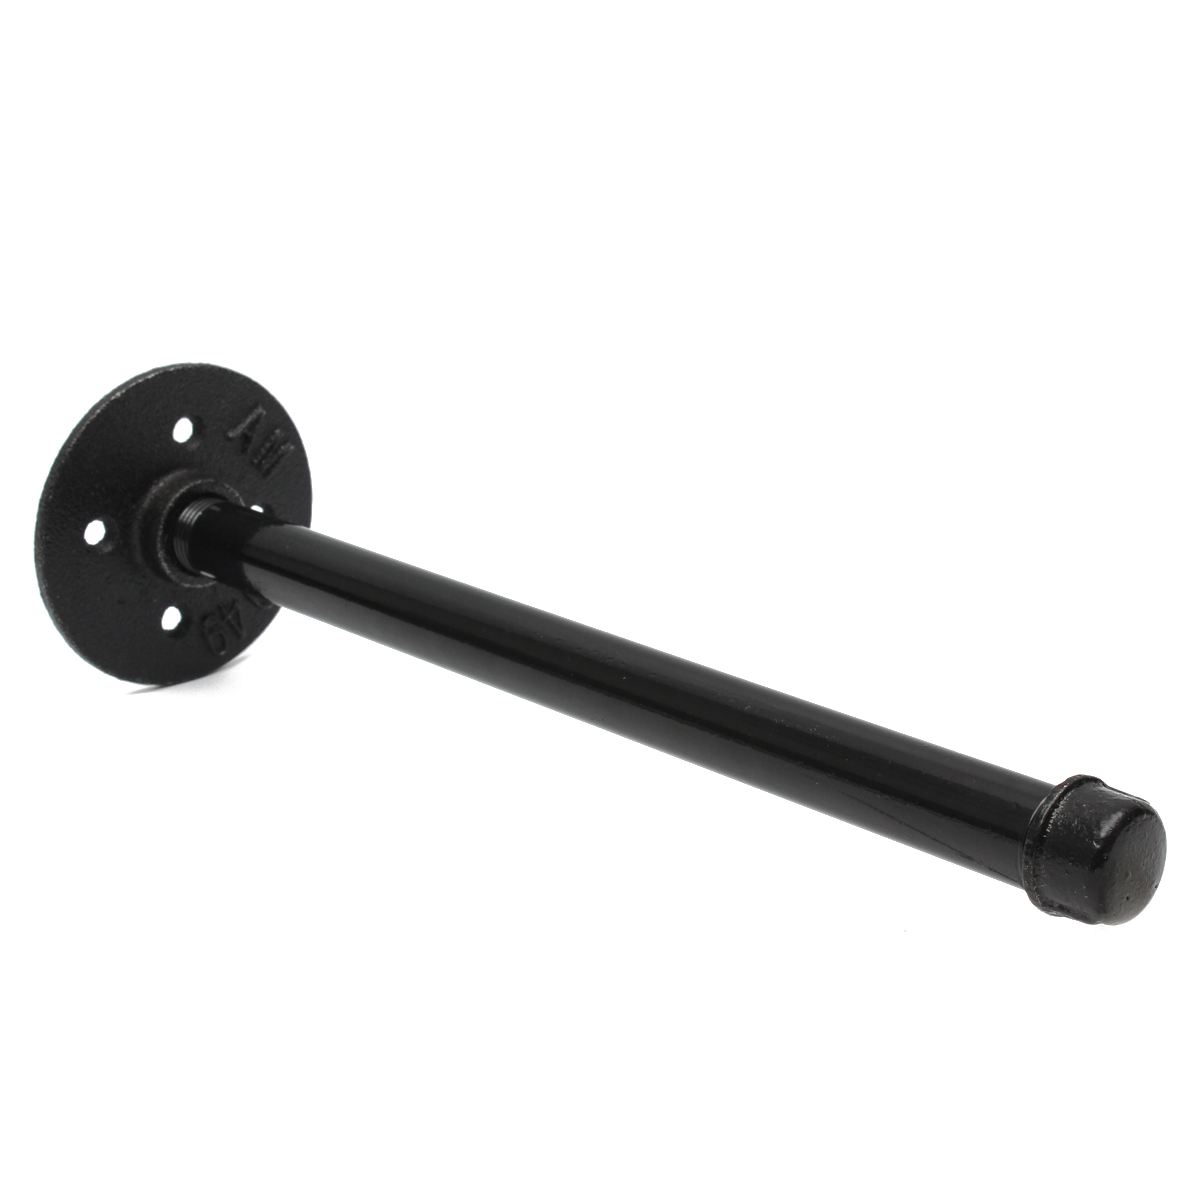 

1/2 Inch Industrial Pipe Shelf Bracket Black Steampunk Pipe with Flange for Home Shop